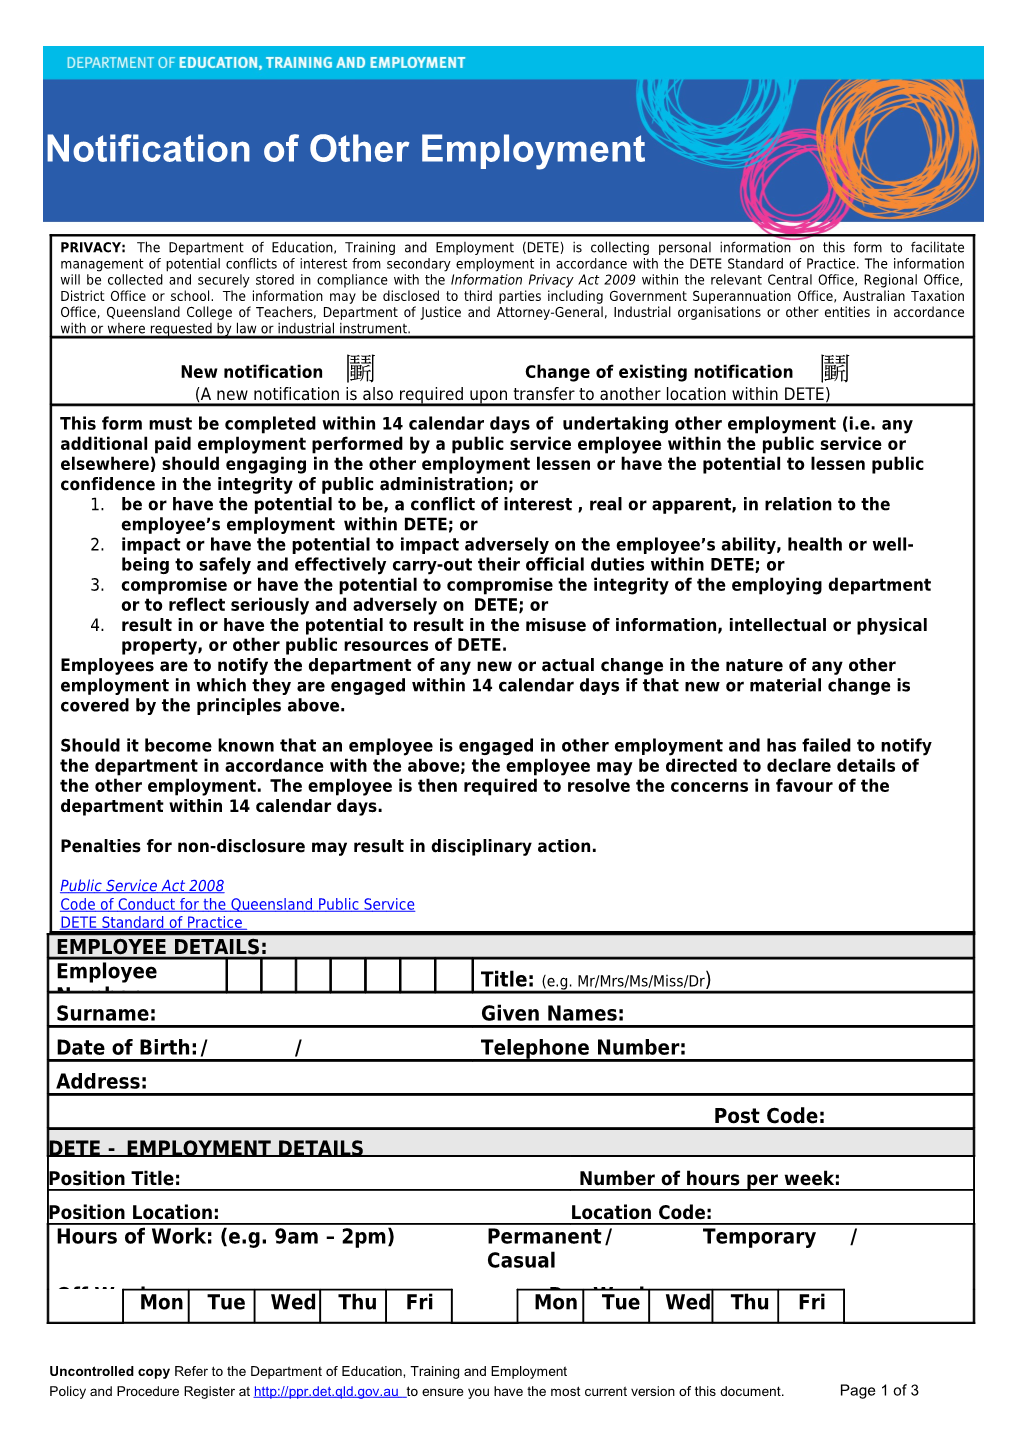 Notification of Other Employment Form